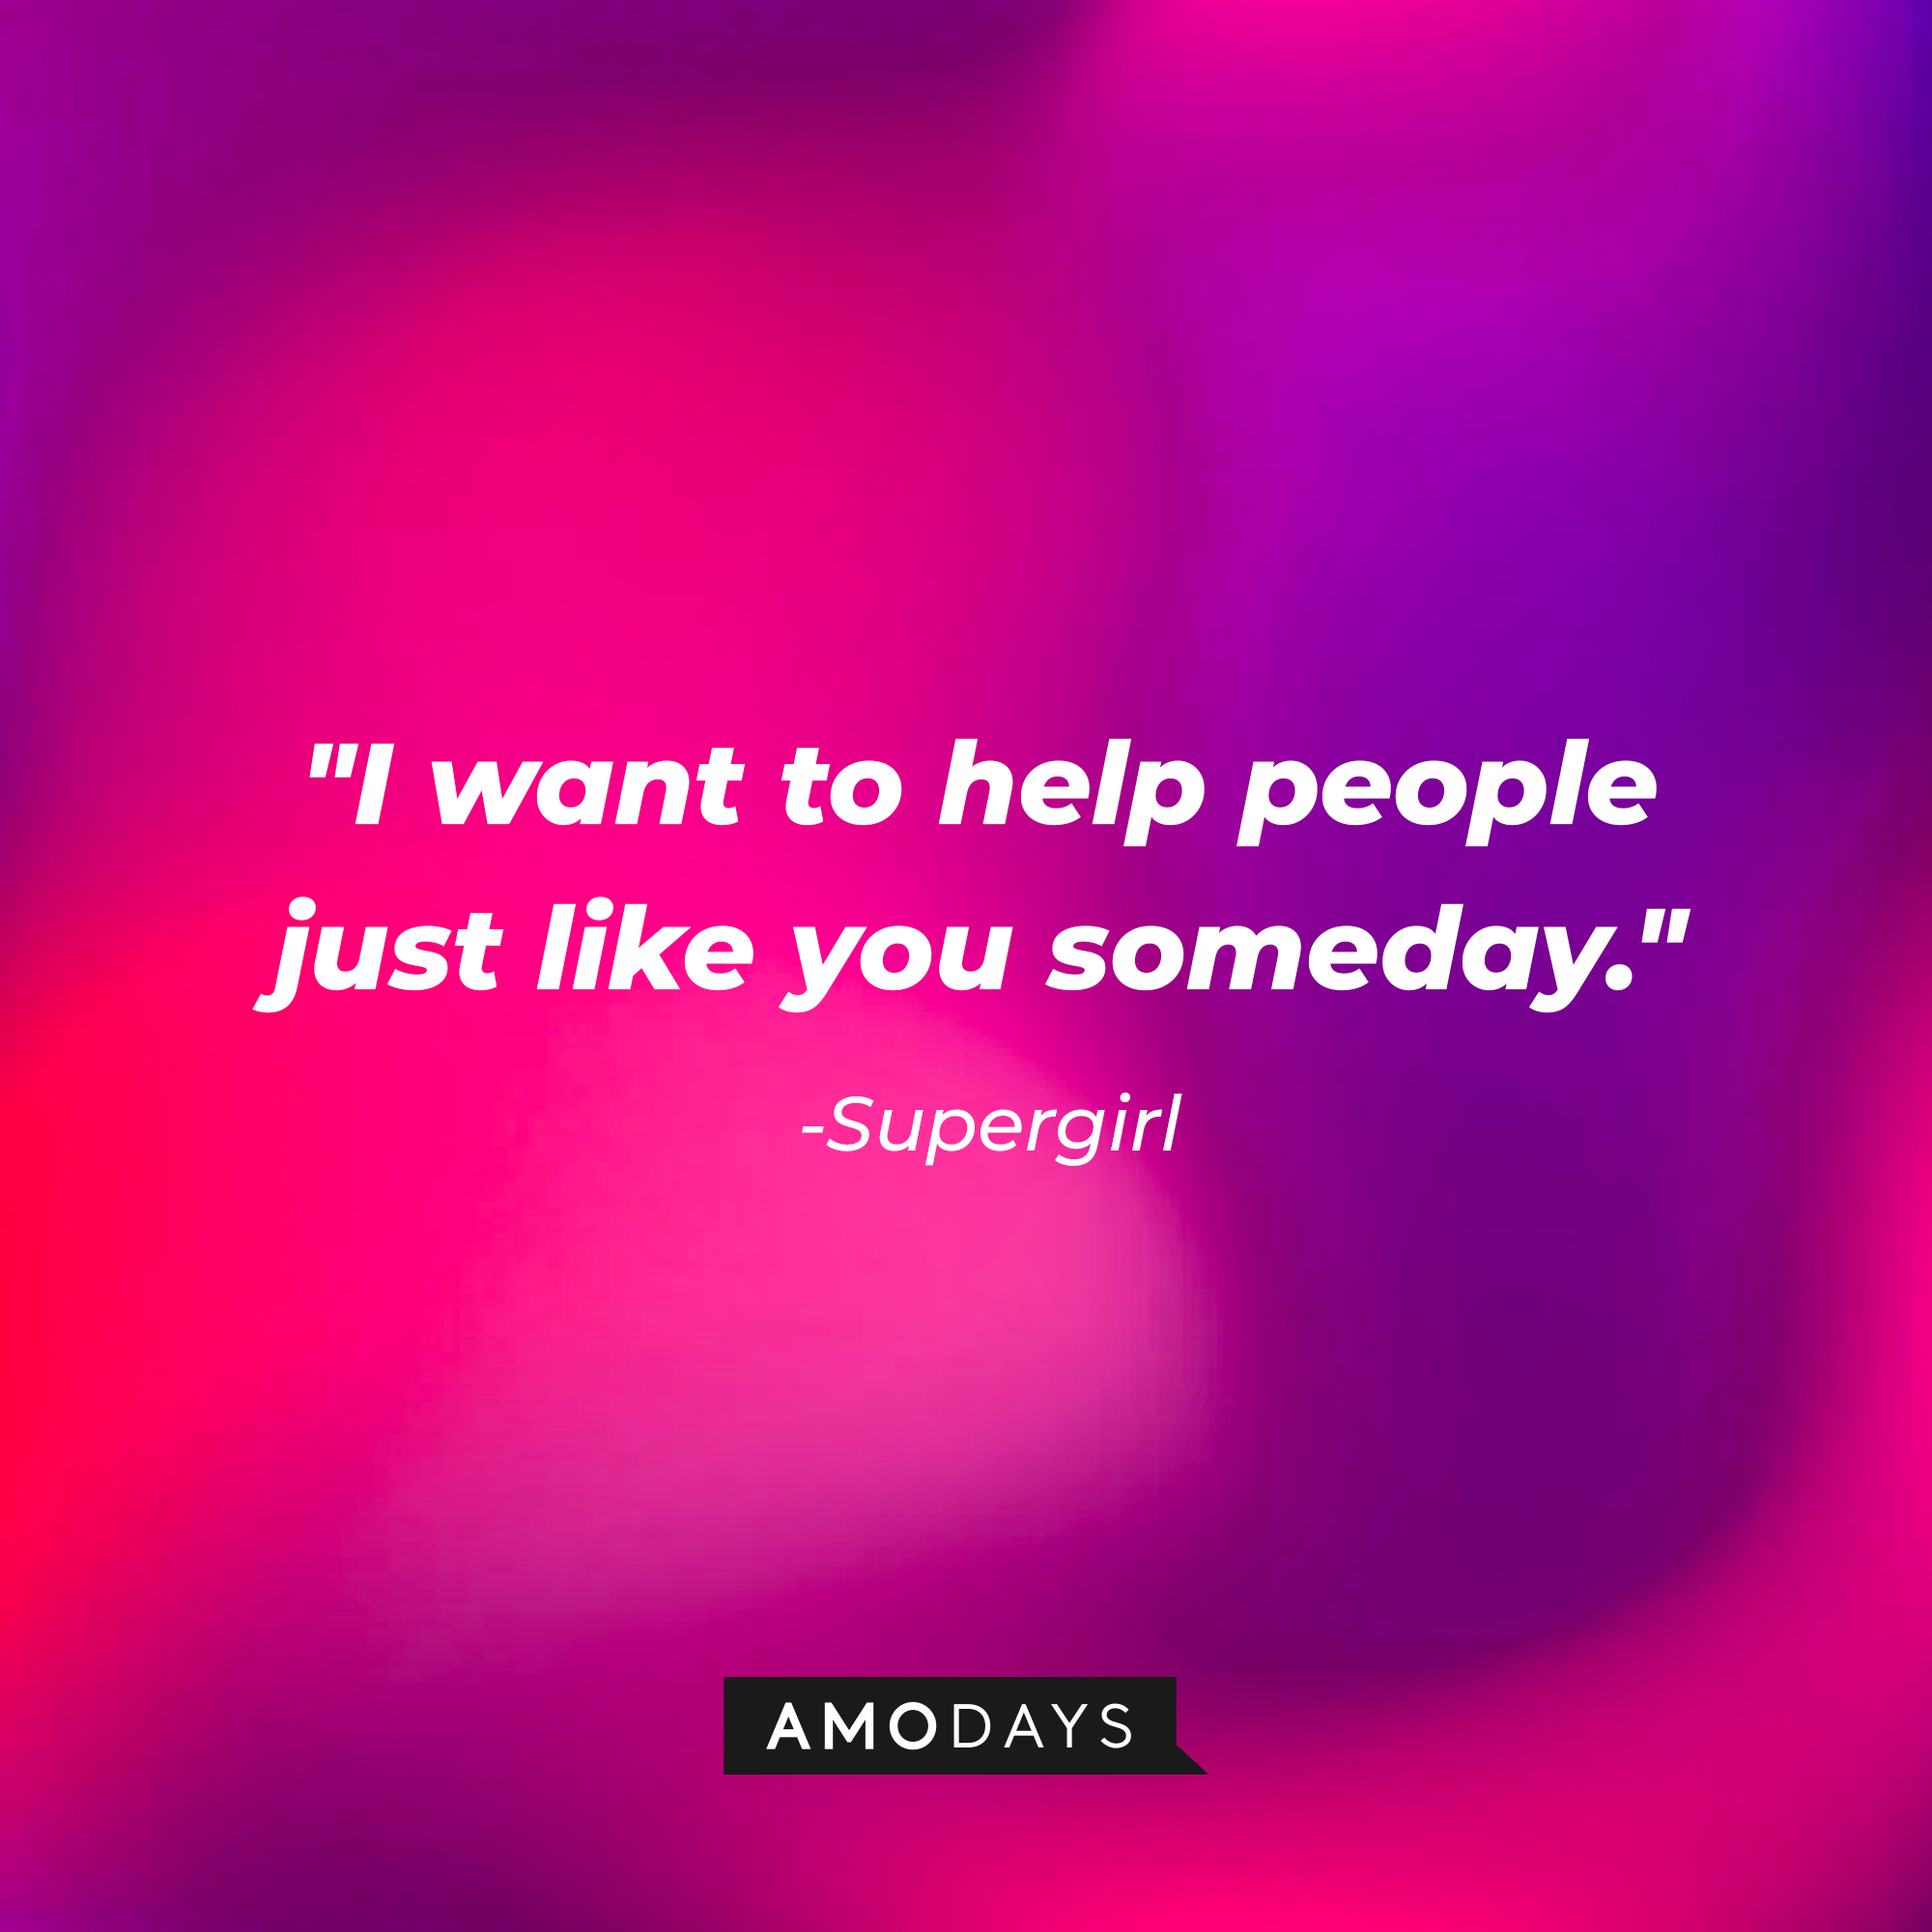 Supergirl's quote: "I want to help people just like you someday." | Source: AmoDays